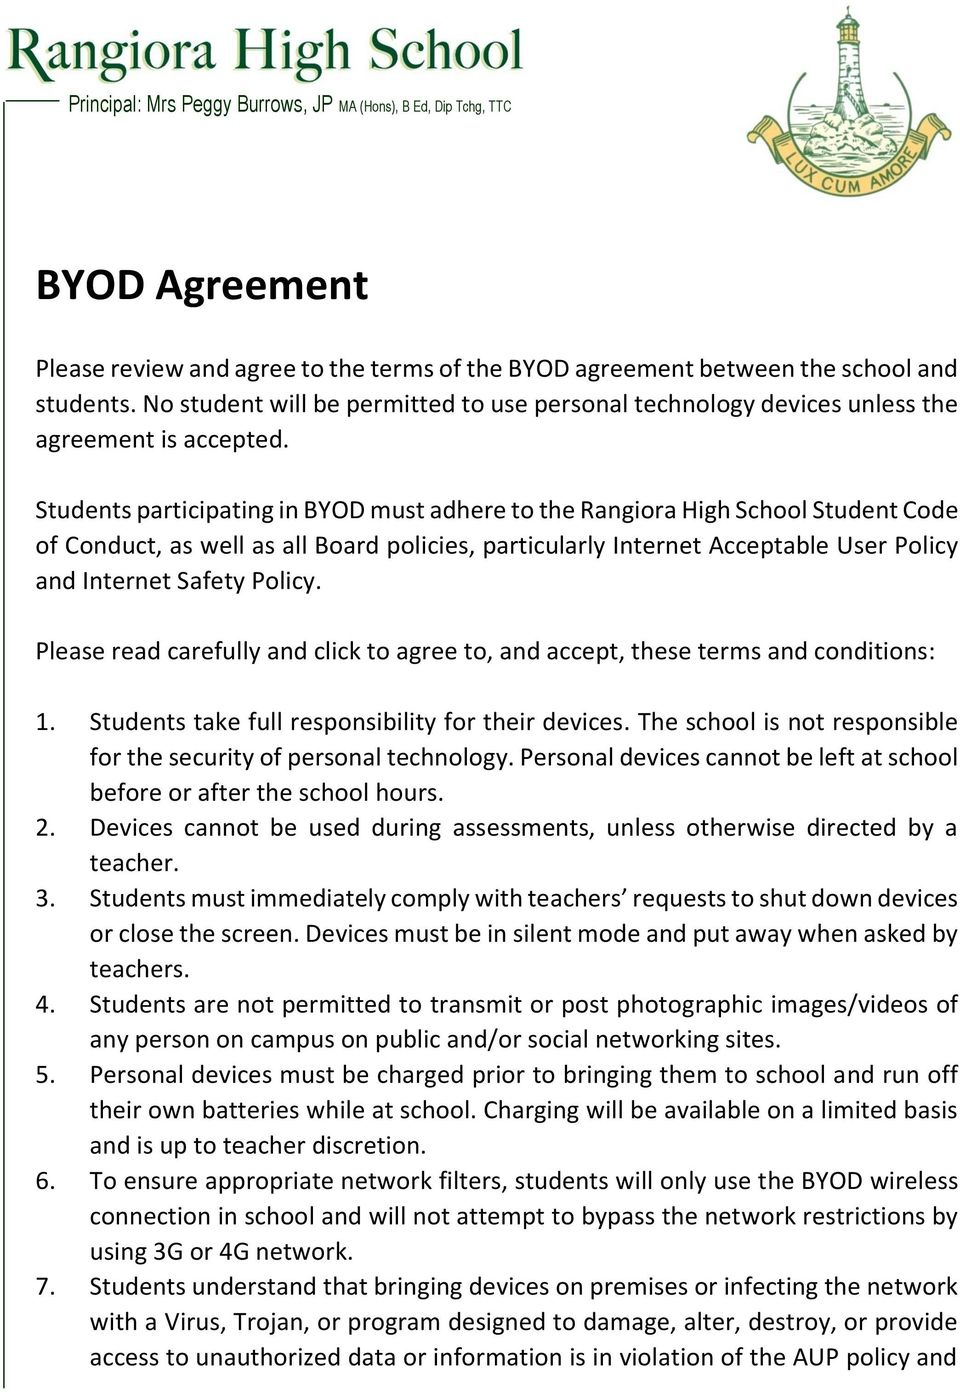 Byod Agreement Form Od Acceptable Use Od Bring Your Own Device Pdf